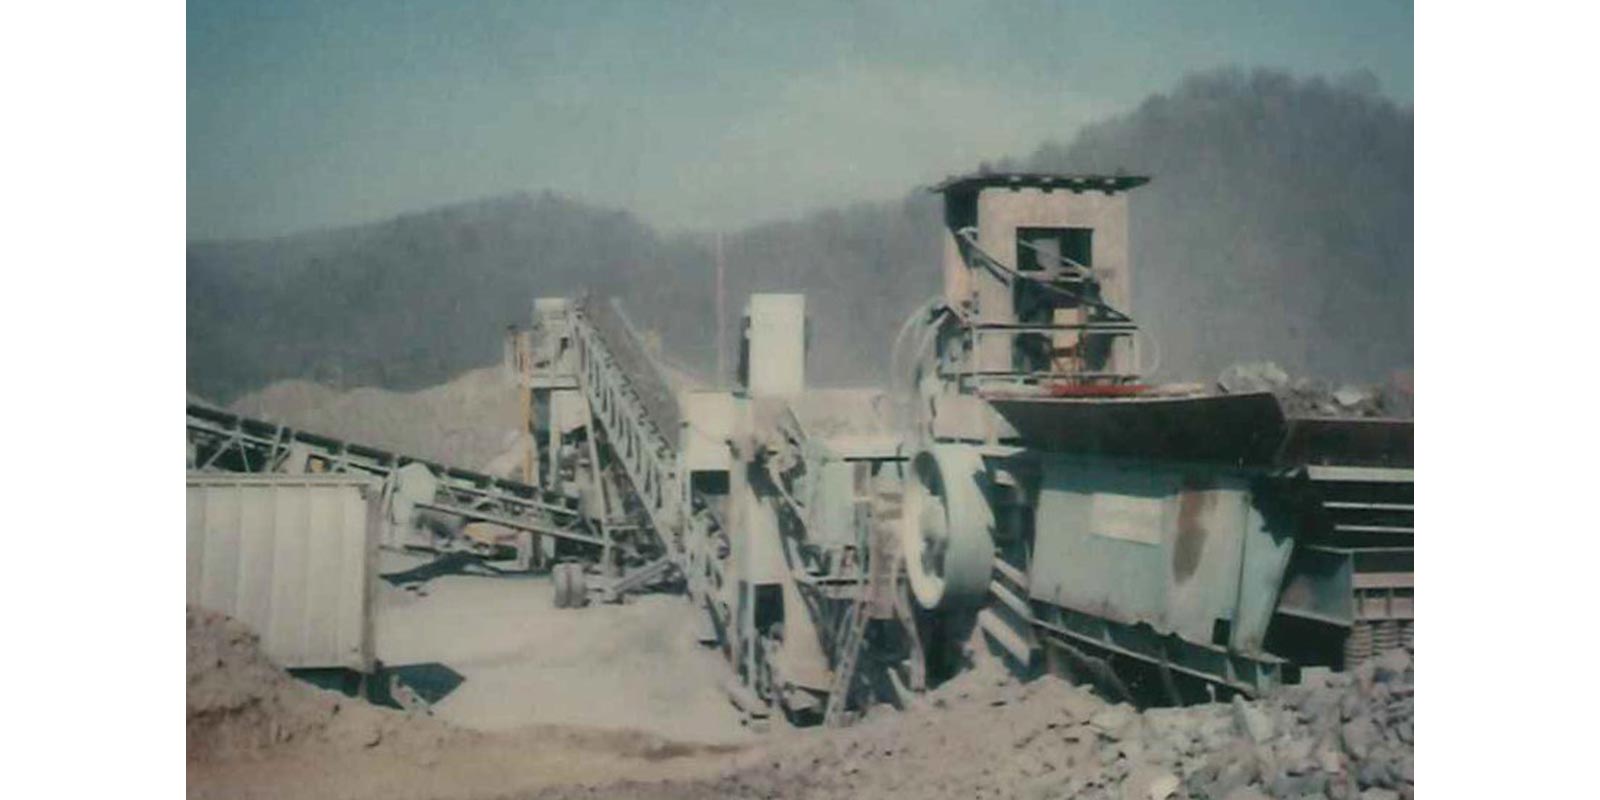 historical photograph of crushing equipment on a work site